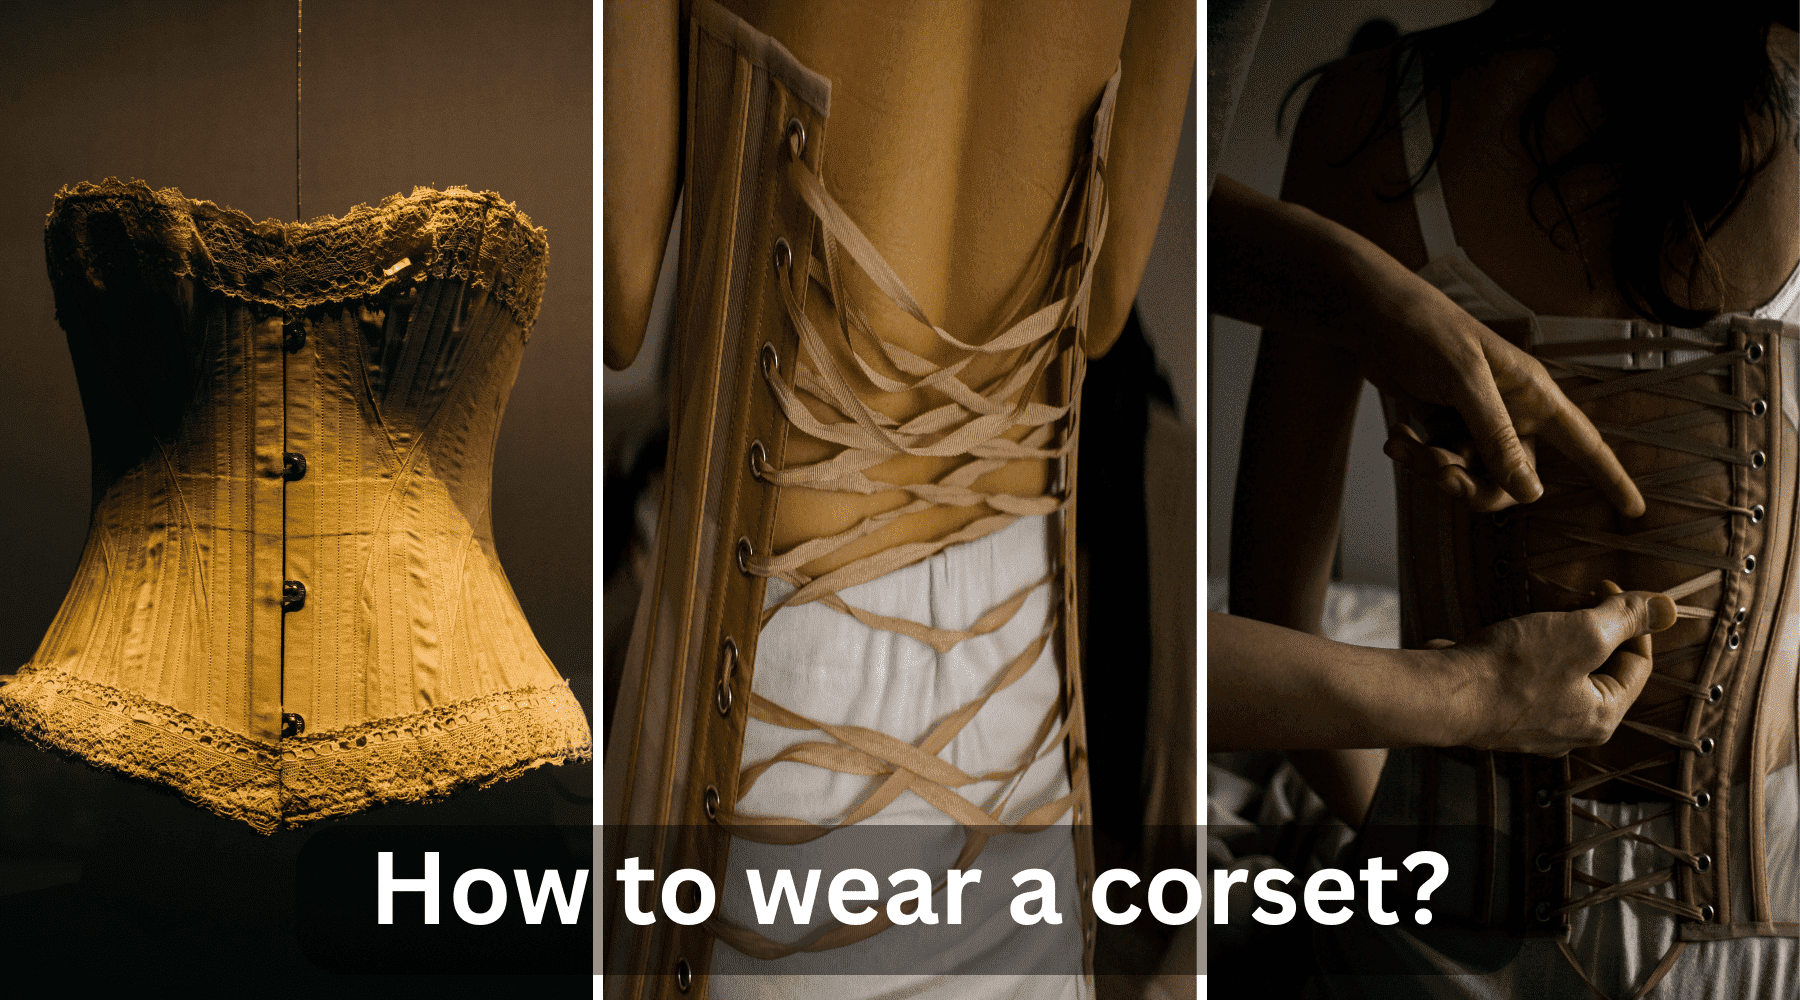 Corset Care 101: What to Do While Wearing a Corset